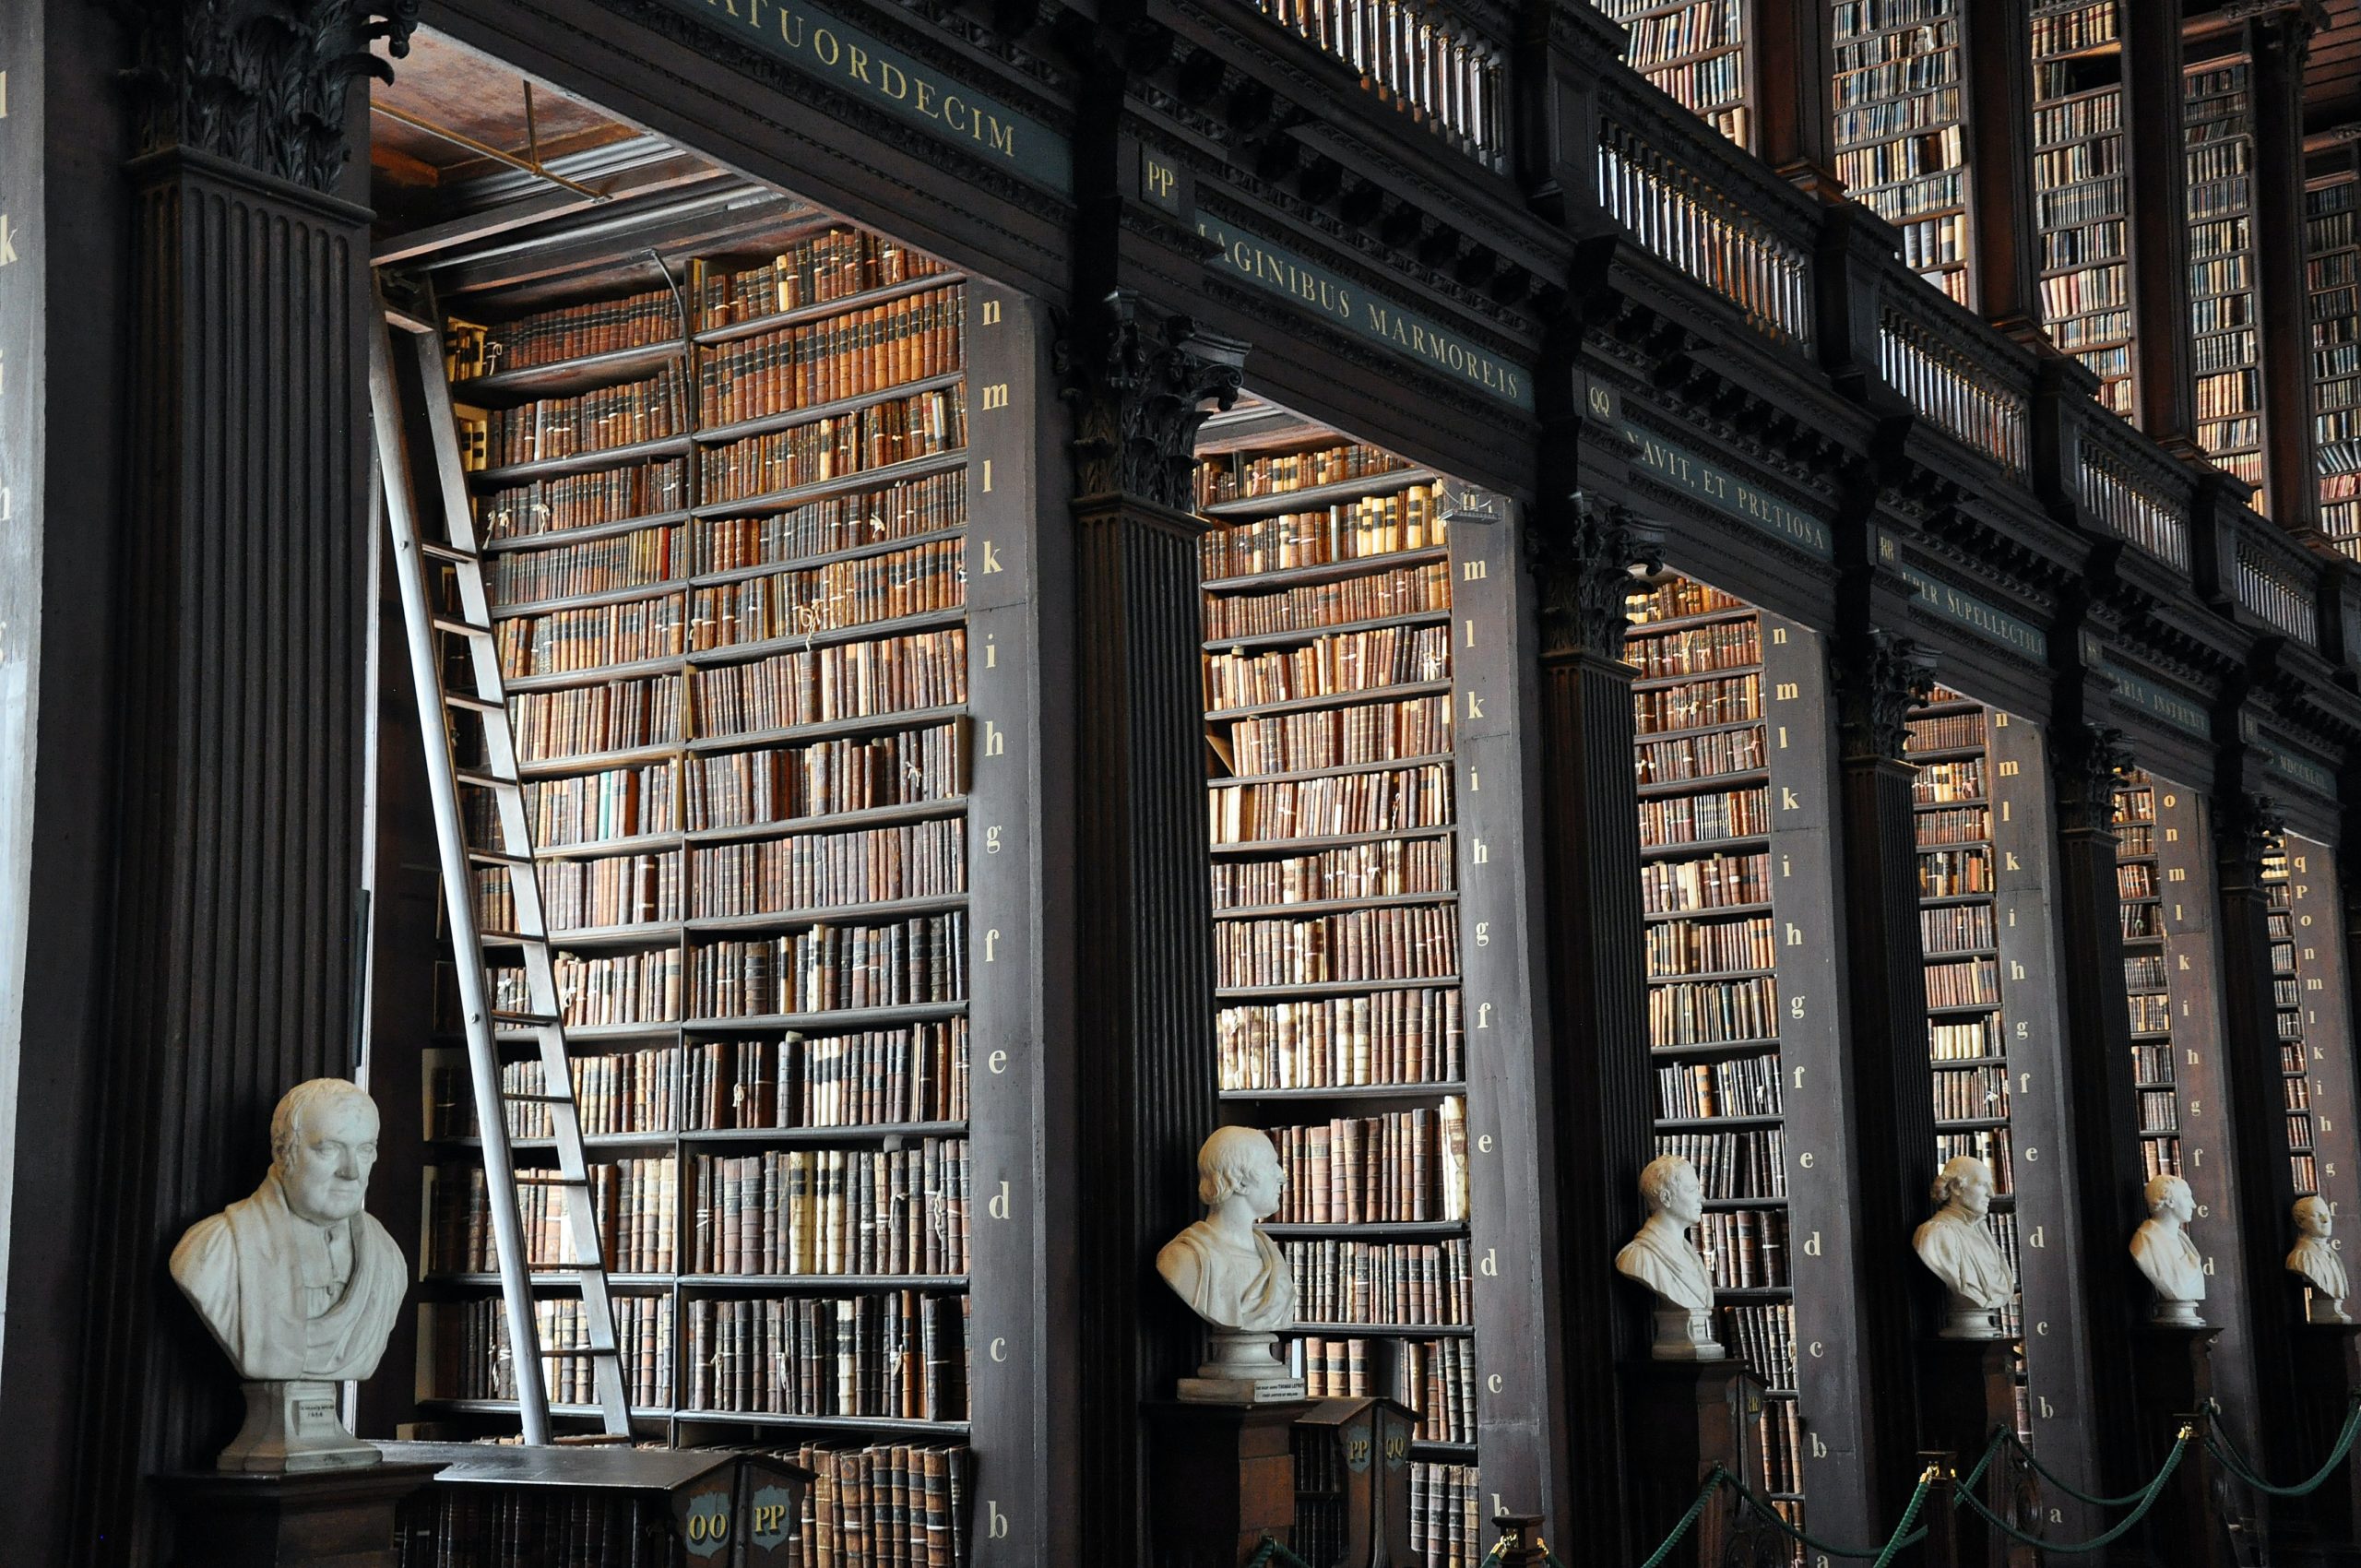 Library with books on black shelves and busts in front of pillars. Taken by Alex Block